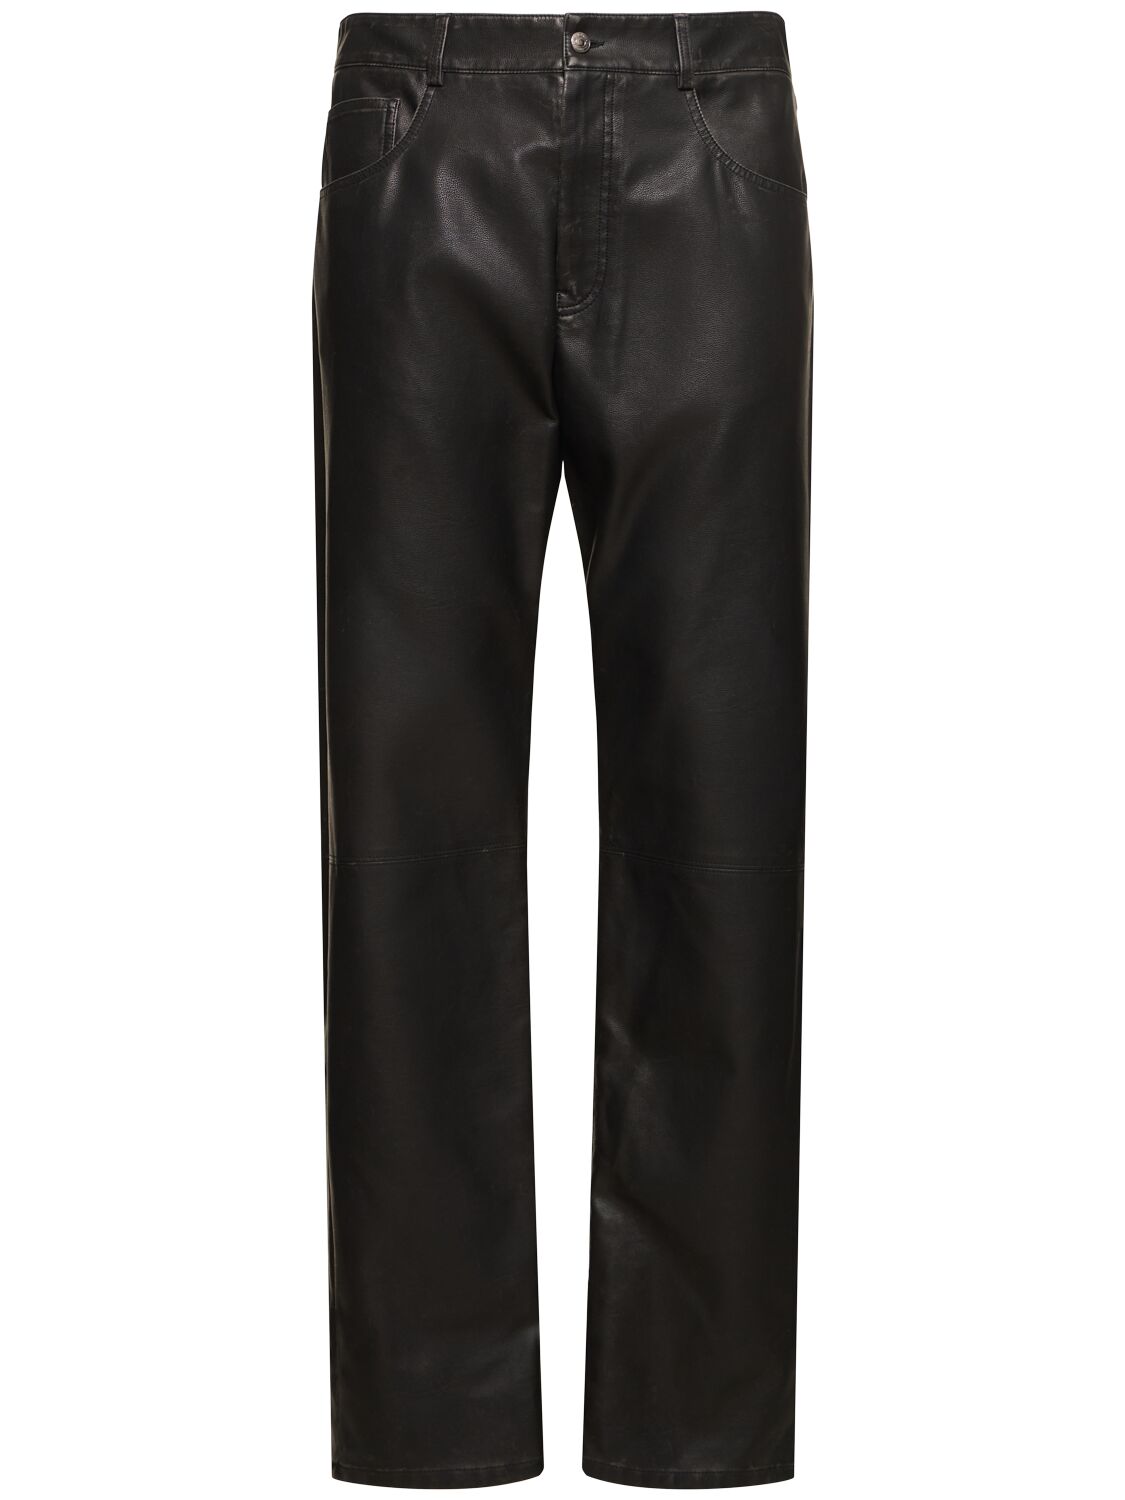 Hammered Faux Leather Pants